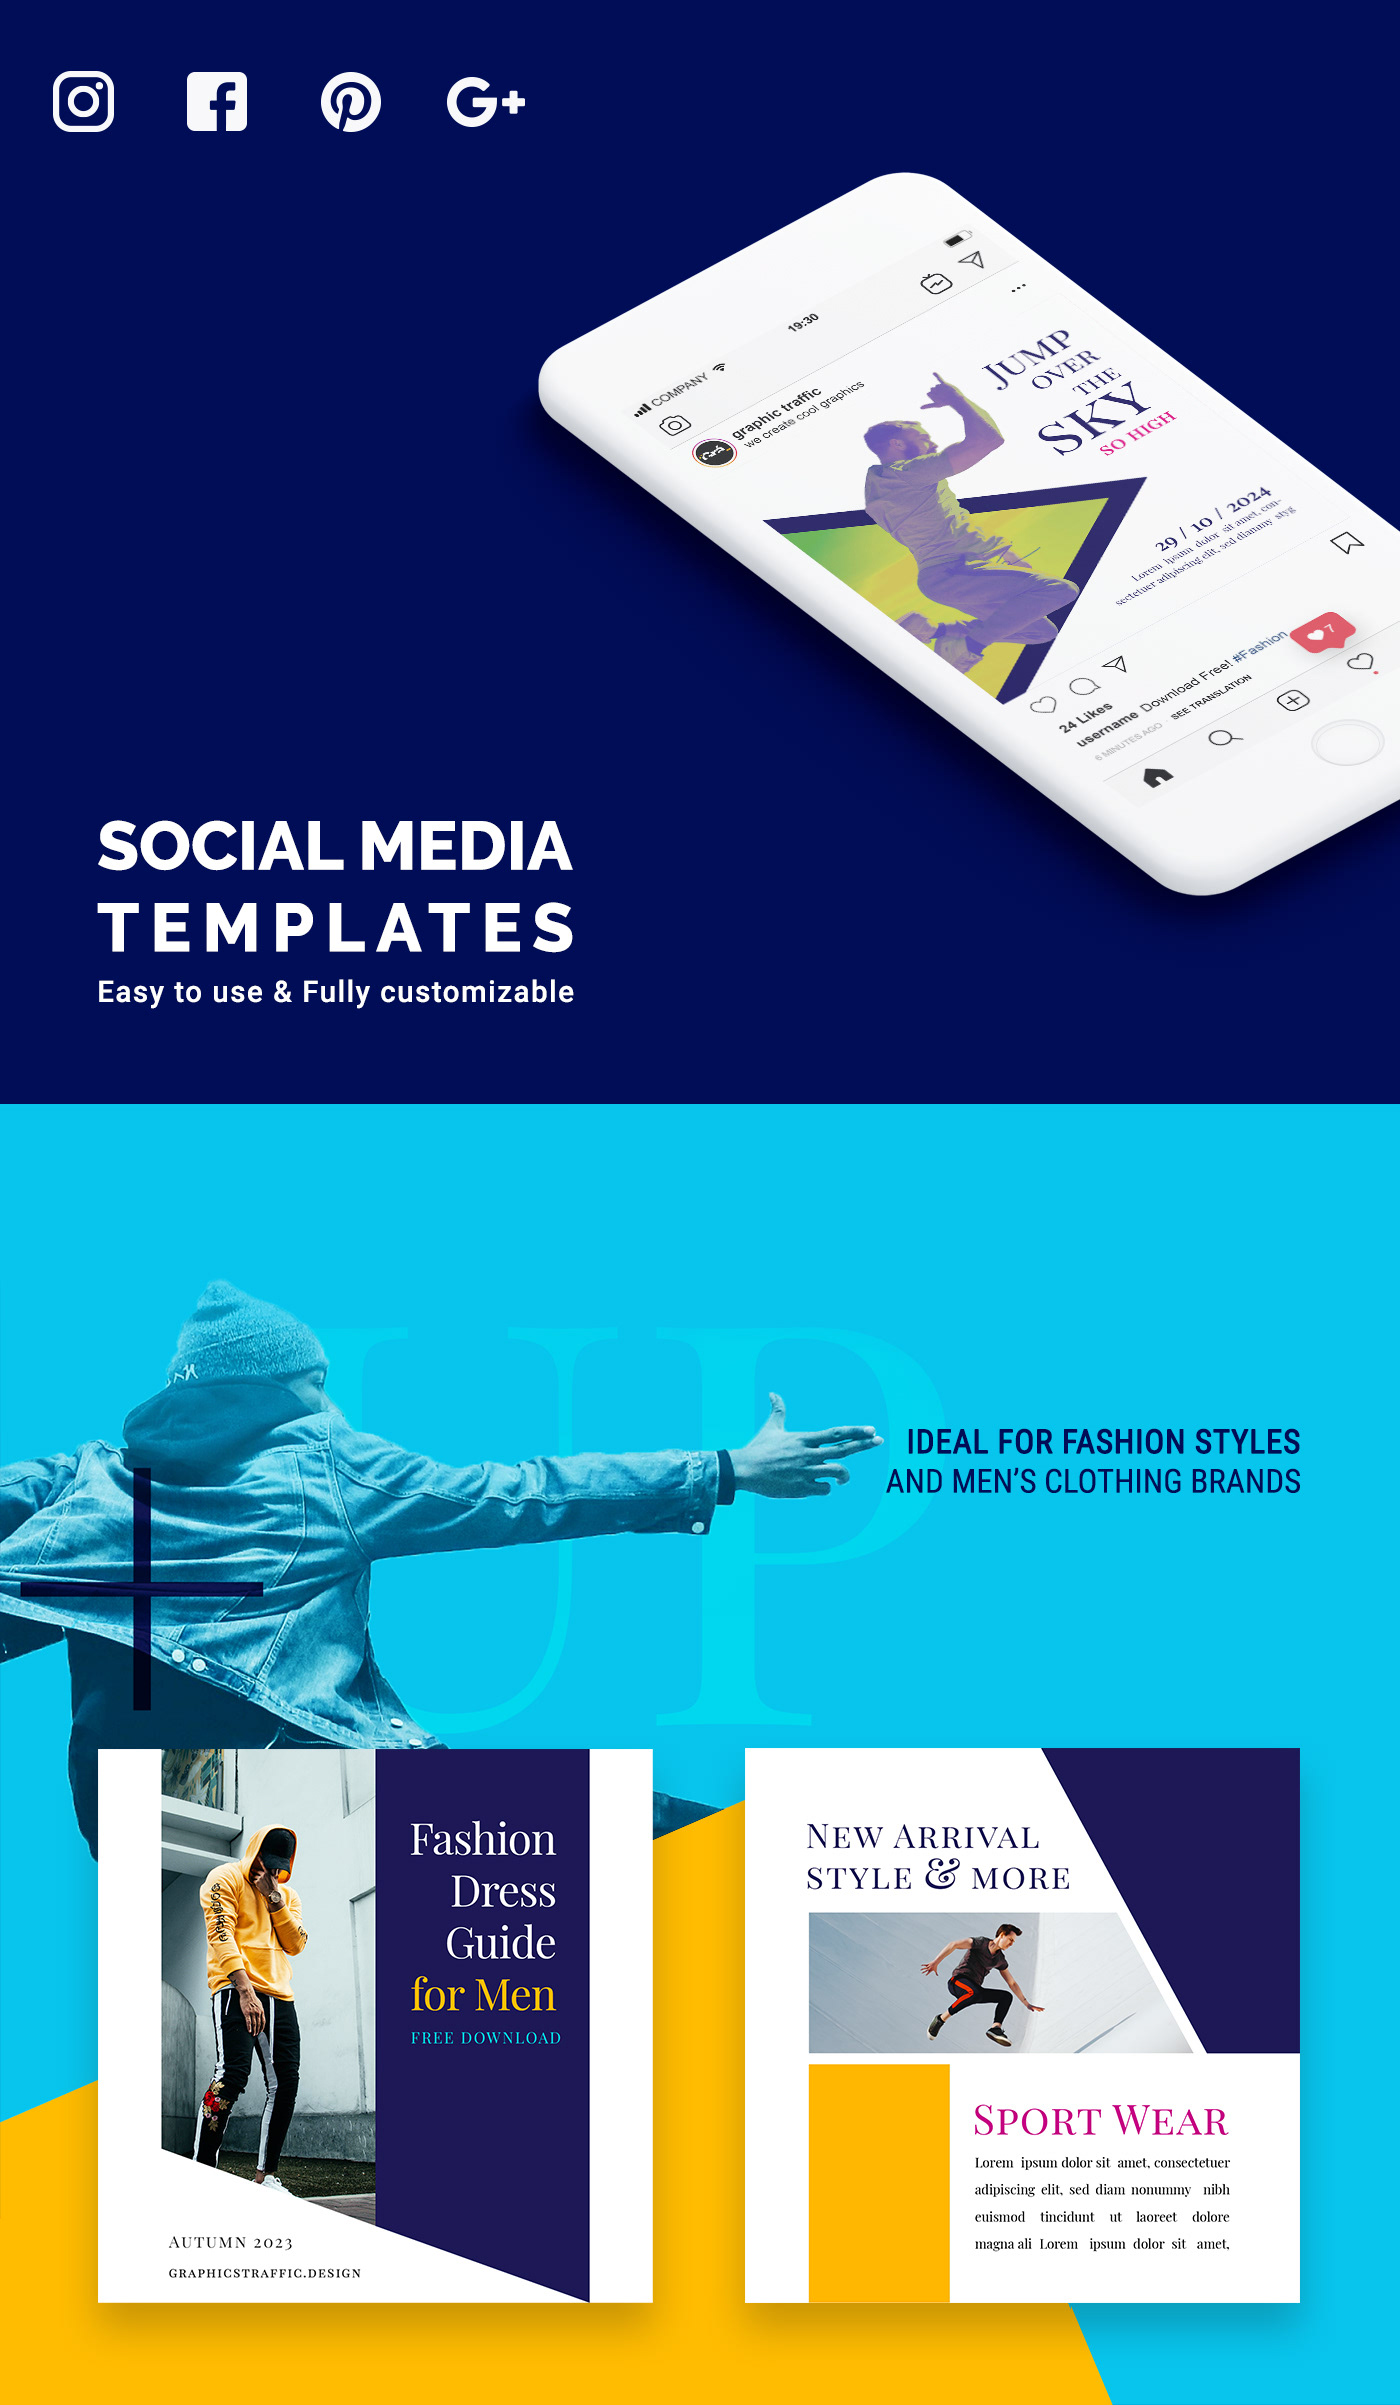 free social media design template photoshop fashion style instagram freebie free download post 2020 trends